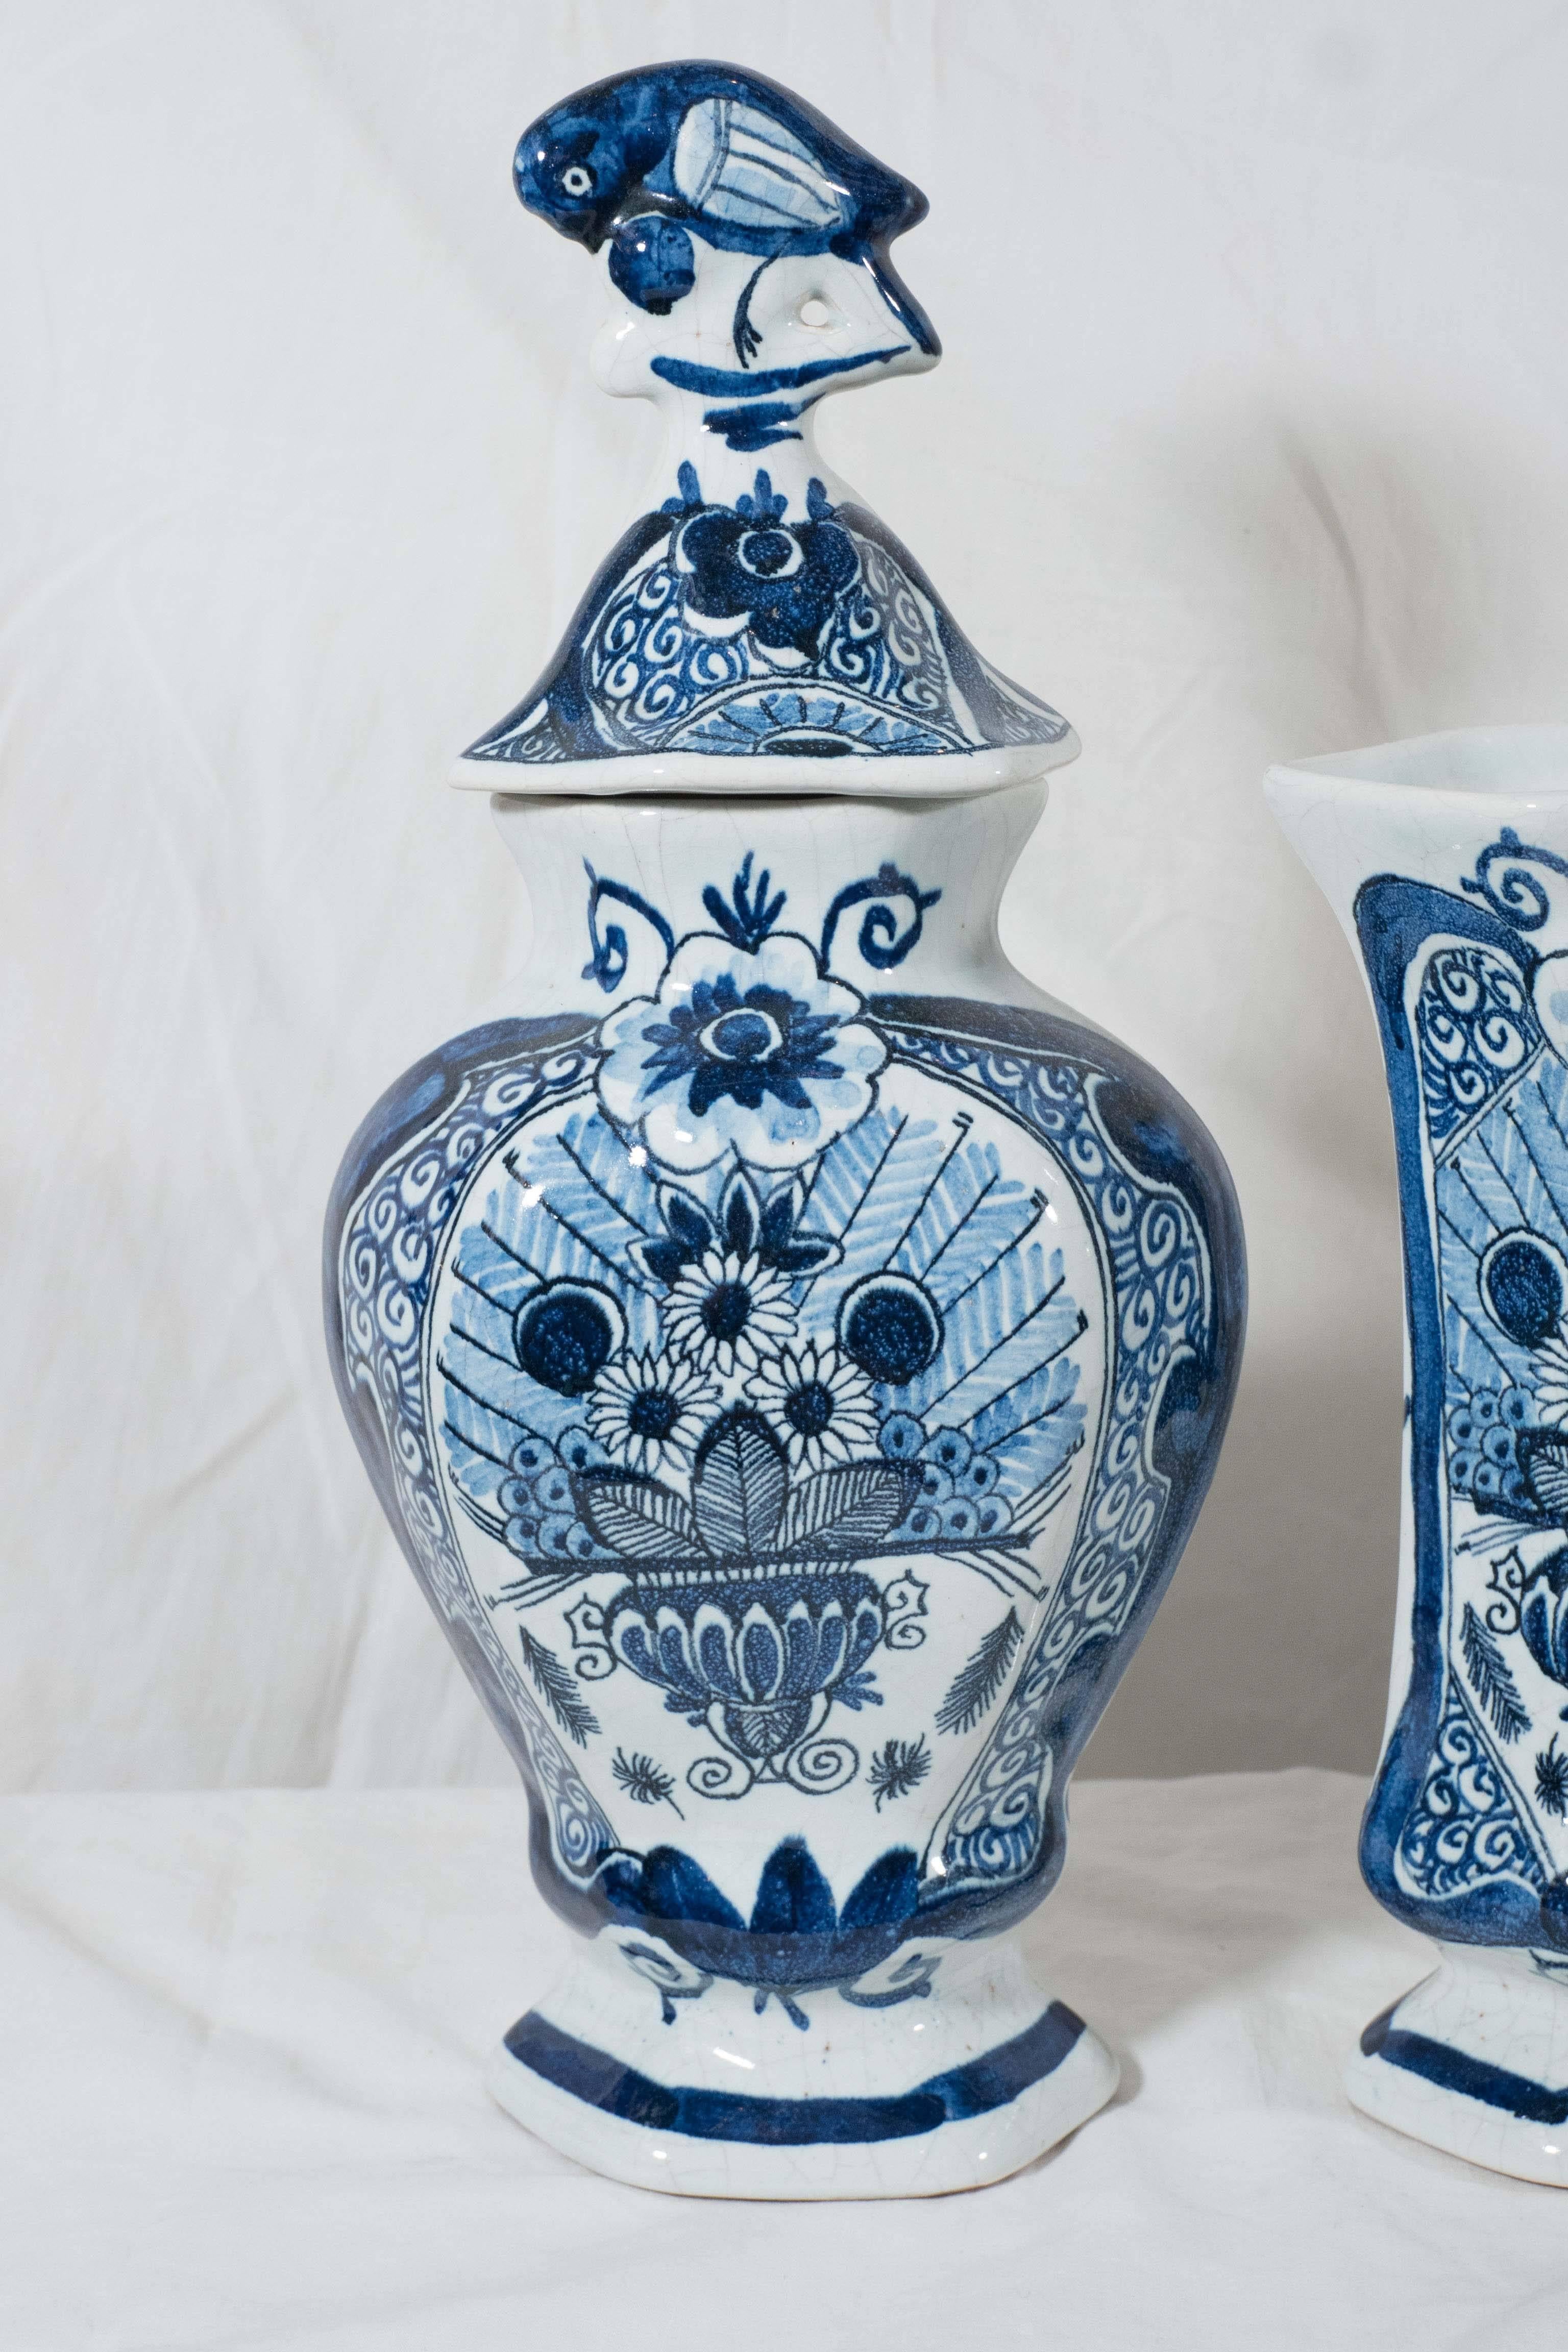 A blue and white five piece Dutch Delft garniture showing a vase filled with sunflowers and ferns. This was one of the most popular Dutch Delft patterns. Because the pattern resembles the fanned out feathers of a peacock the design has come to be